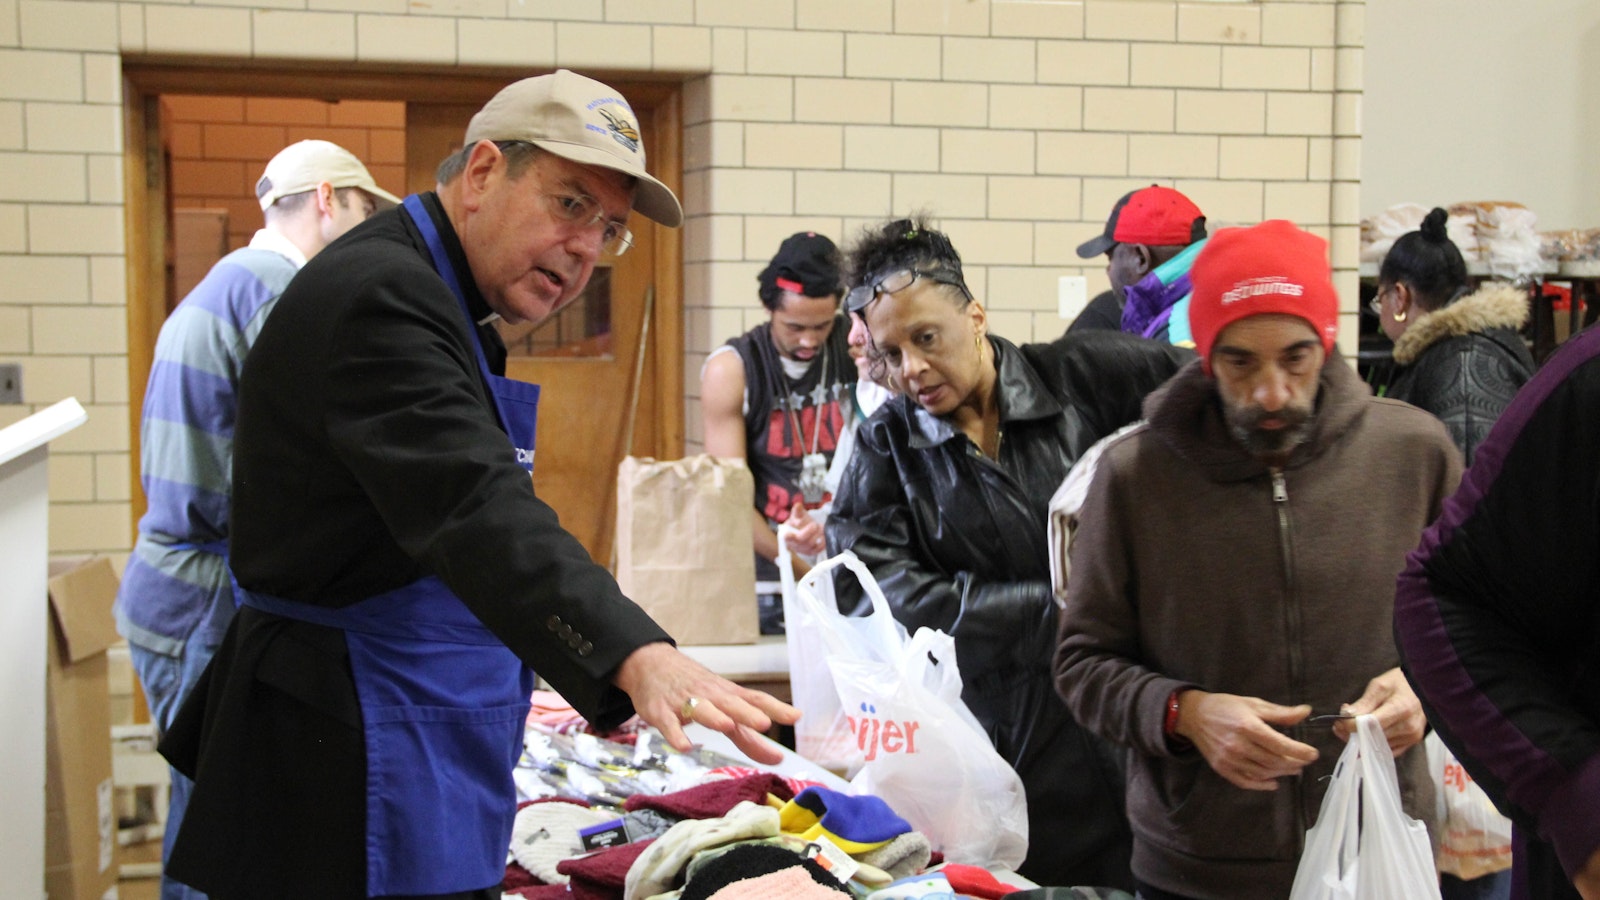 Archbishop Vigneron helps hand out hats, gloves and scarves at the Matchan Nutrition Center in Pontiac on Dec. 22, 2016. The soup kitchen, which serves hot meals to approximately 500 people every Tuesday and Thursday, is in the gym of St. Vincent de Paul Church, part of St. Damien of Molokai Parish. (Jonathan Francis | Detroit Catholic file photo)